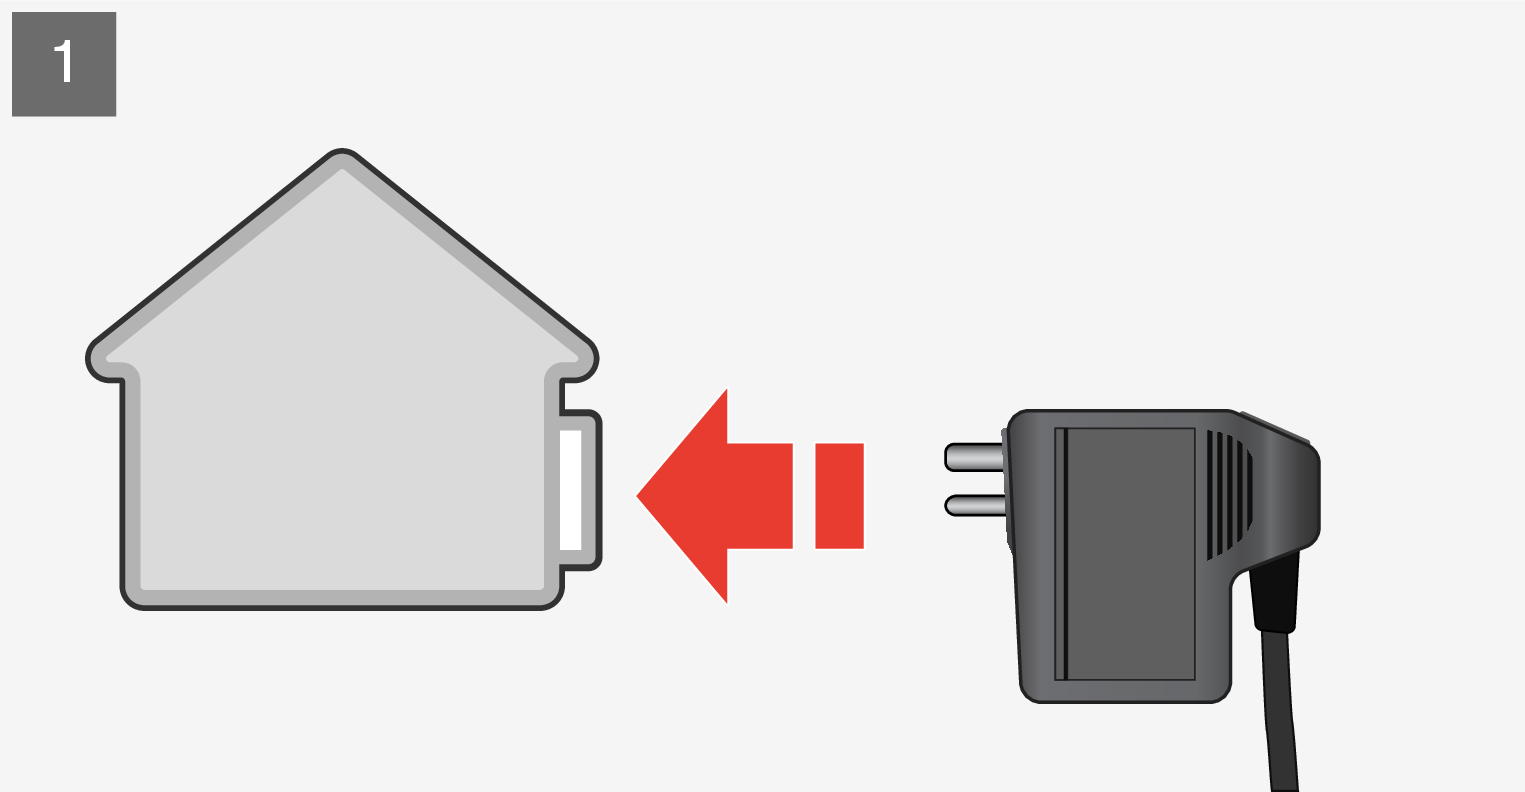 PS-1926-Hybrid-Plug in cable to house US